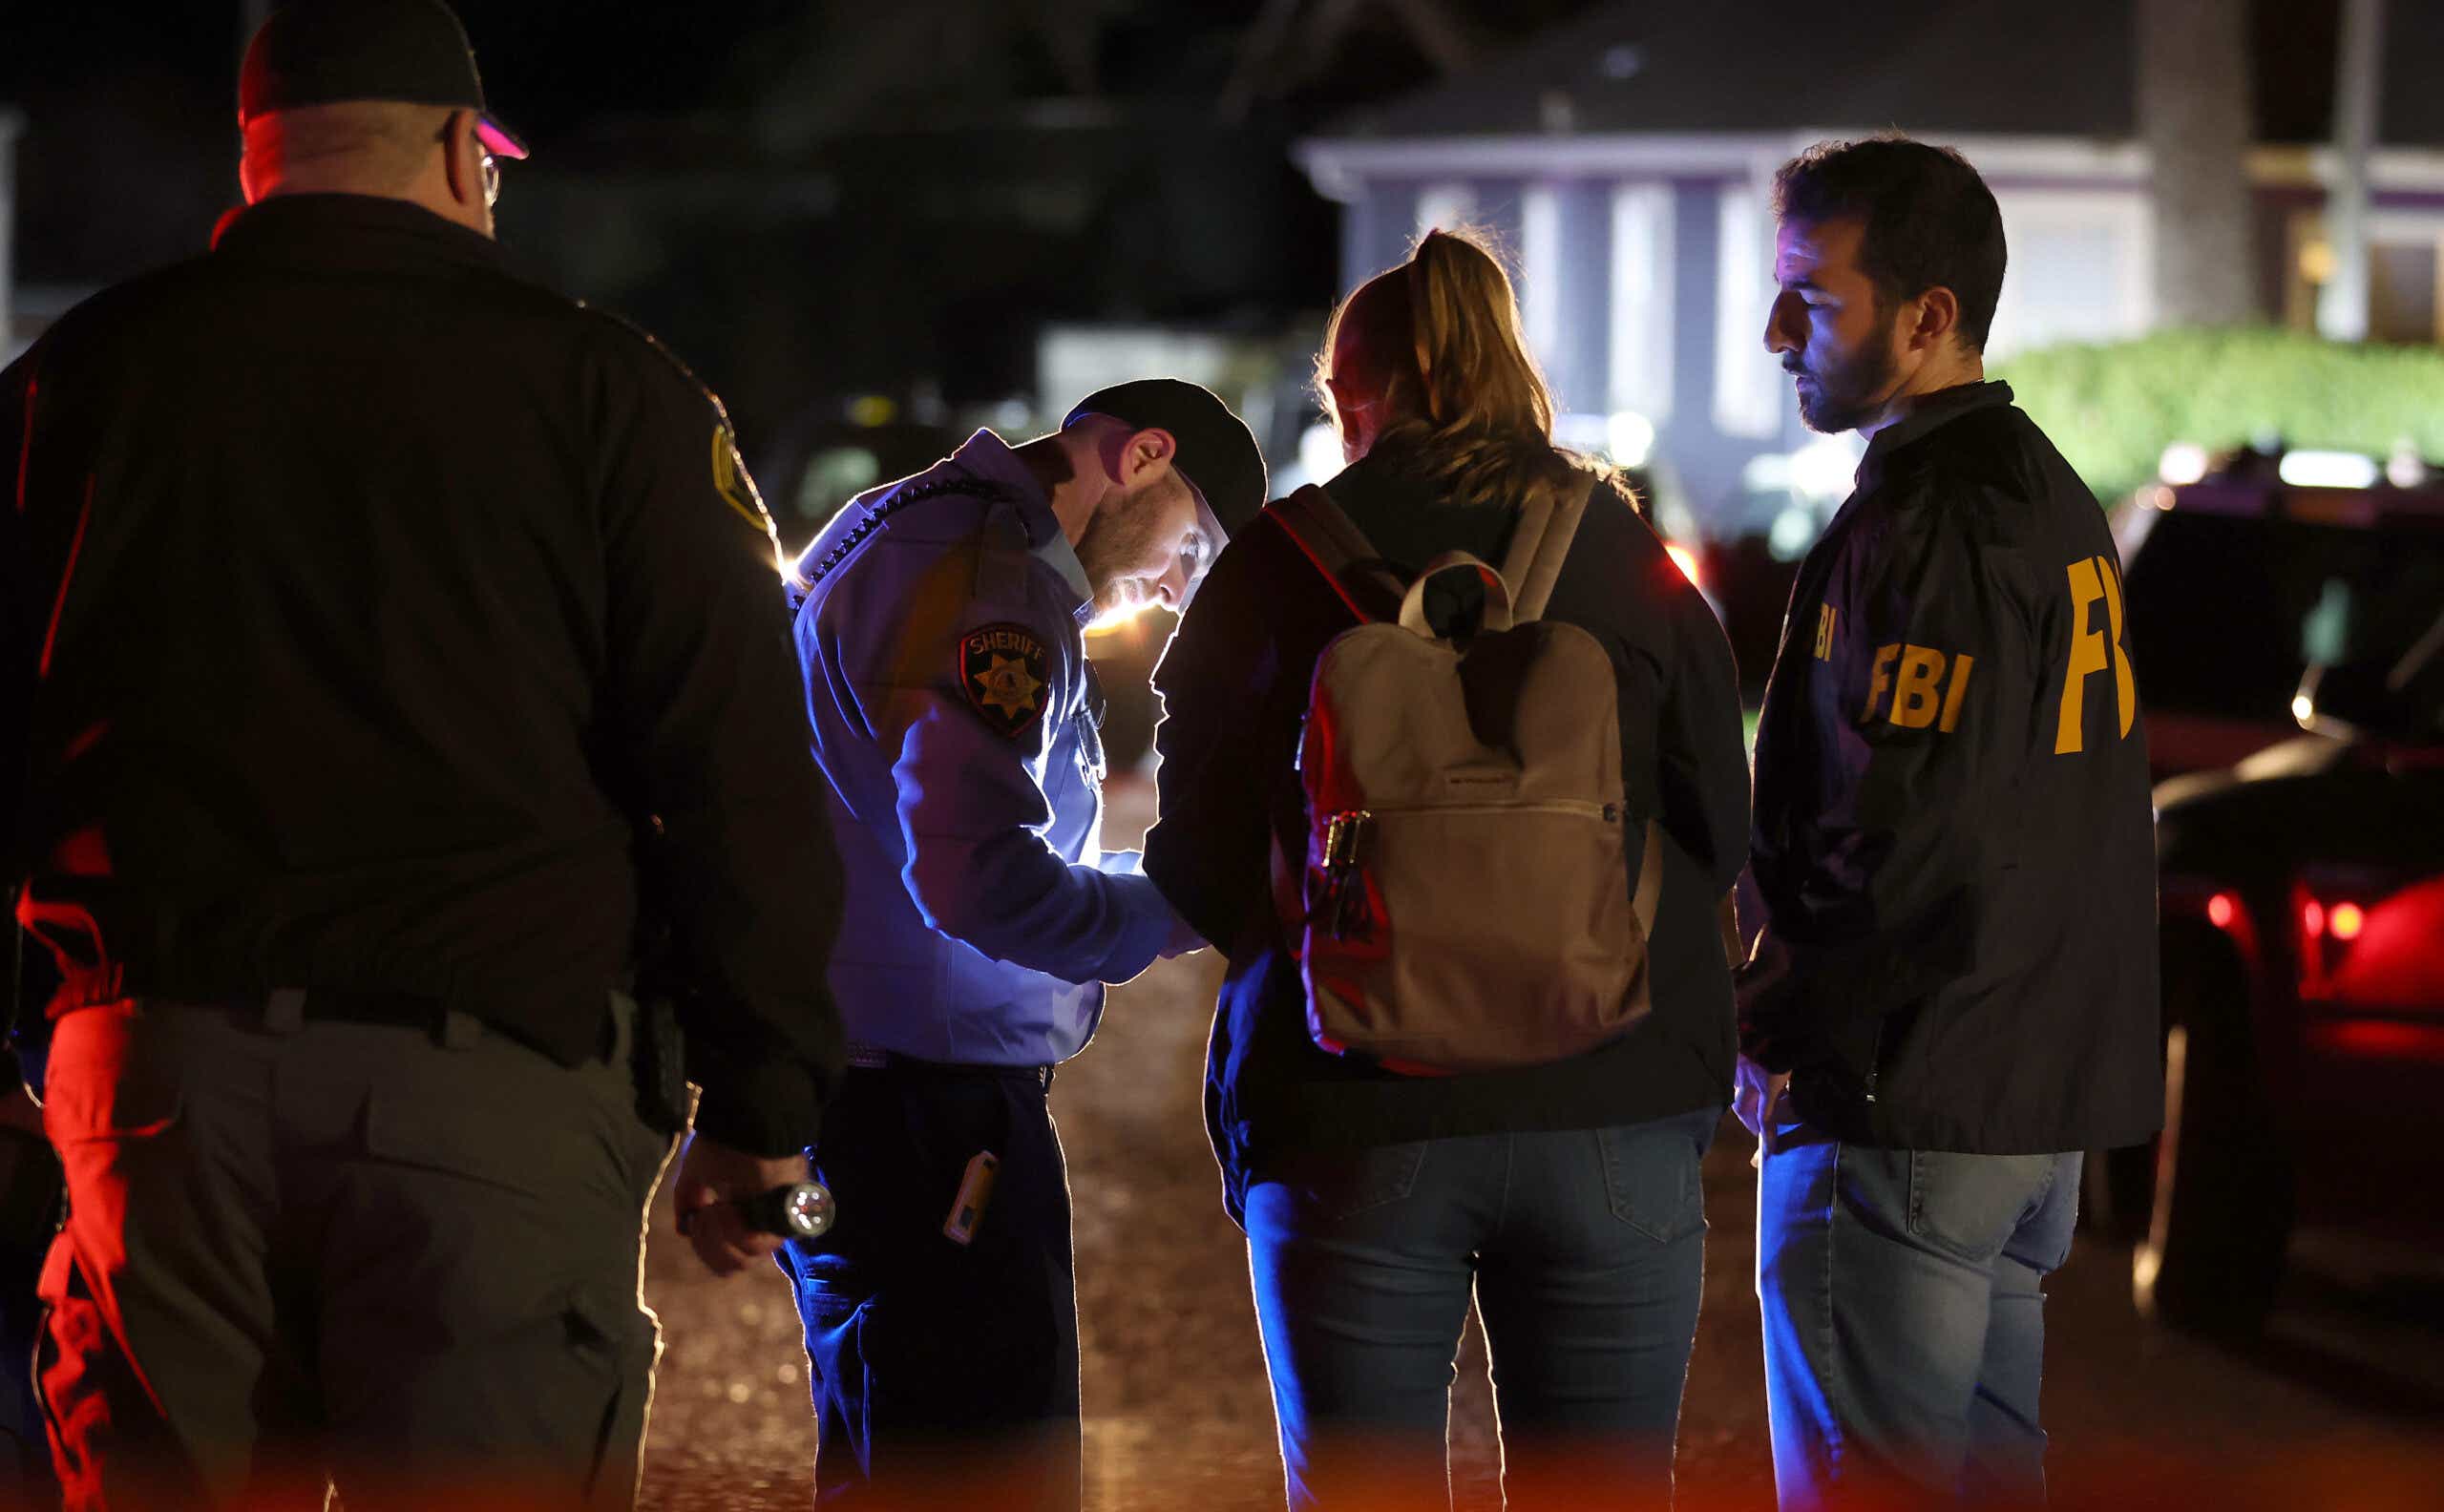 iff deputy checks in FBI agents as they arrive at the scene of a shooting